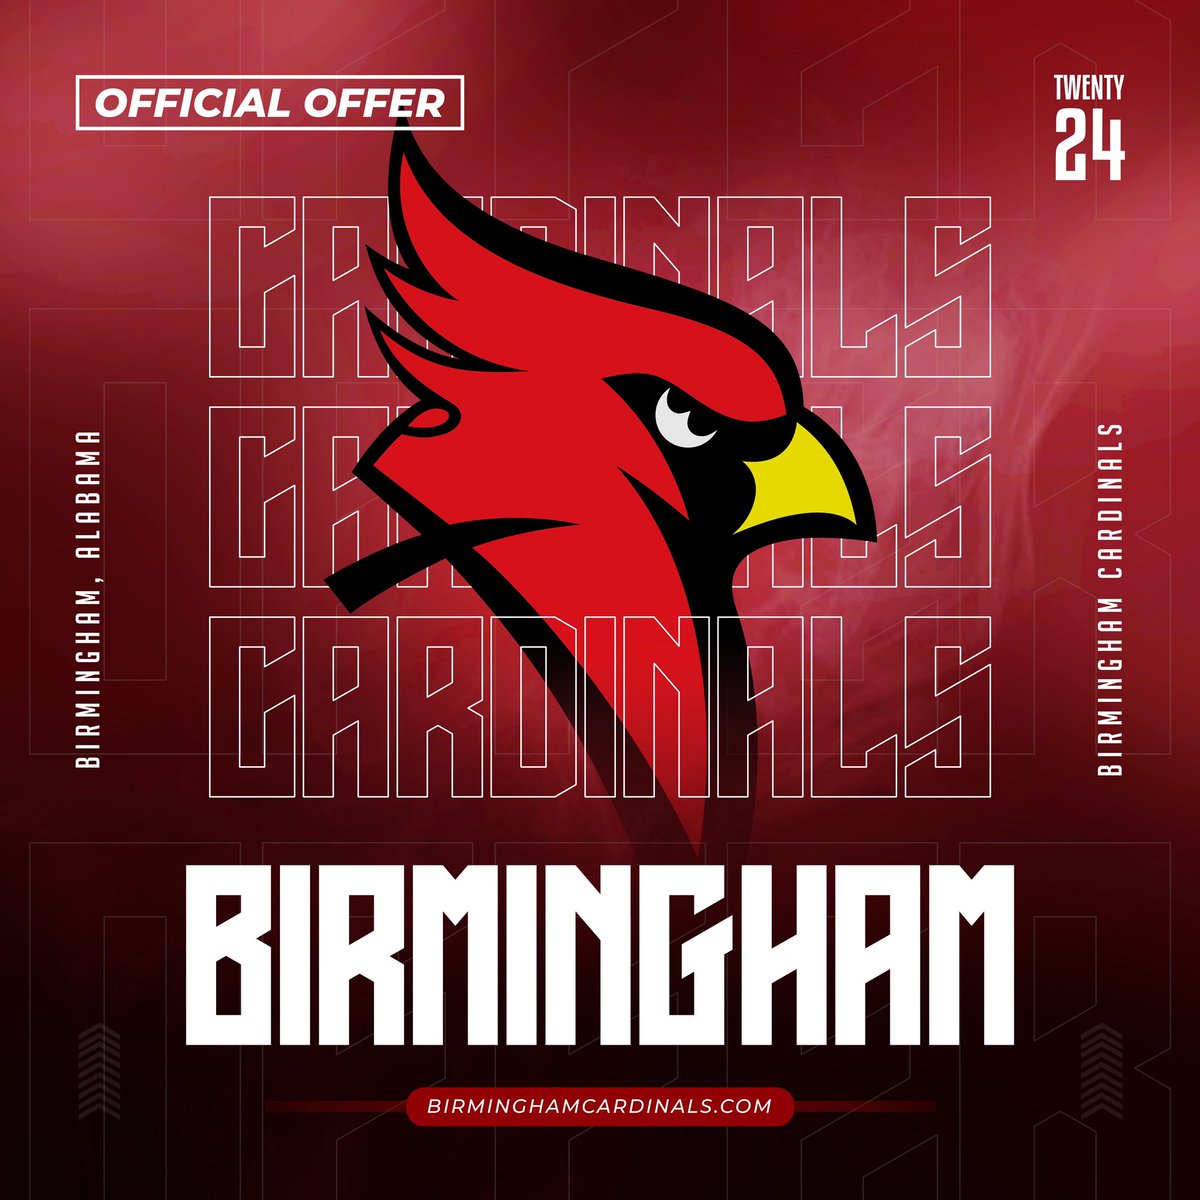 Blessed to receive my first offer from @BirminghamCards @coachhalwalker!!!!